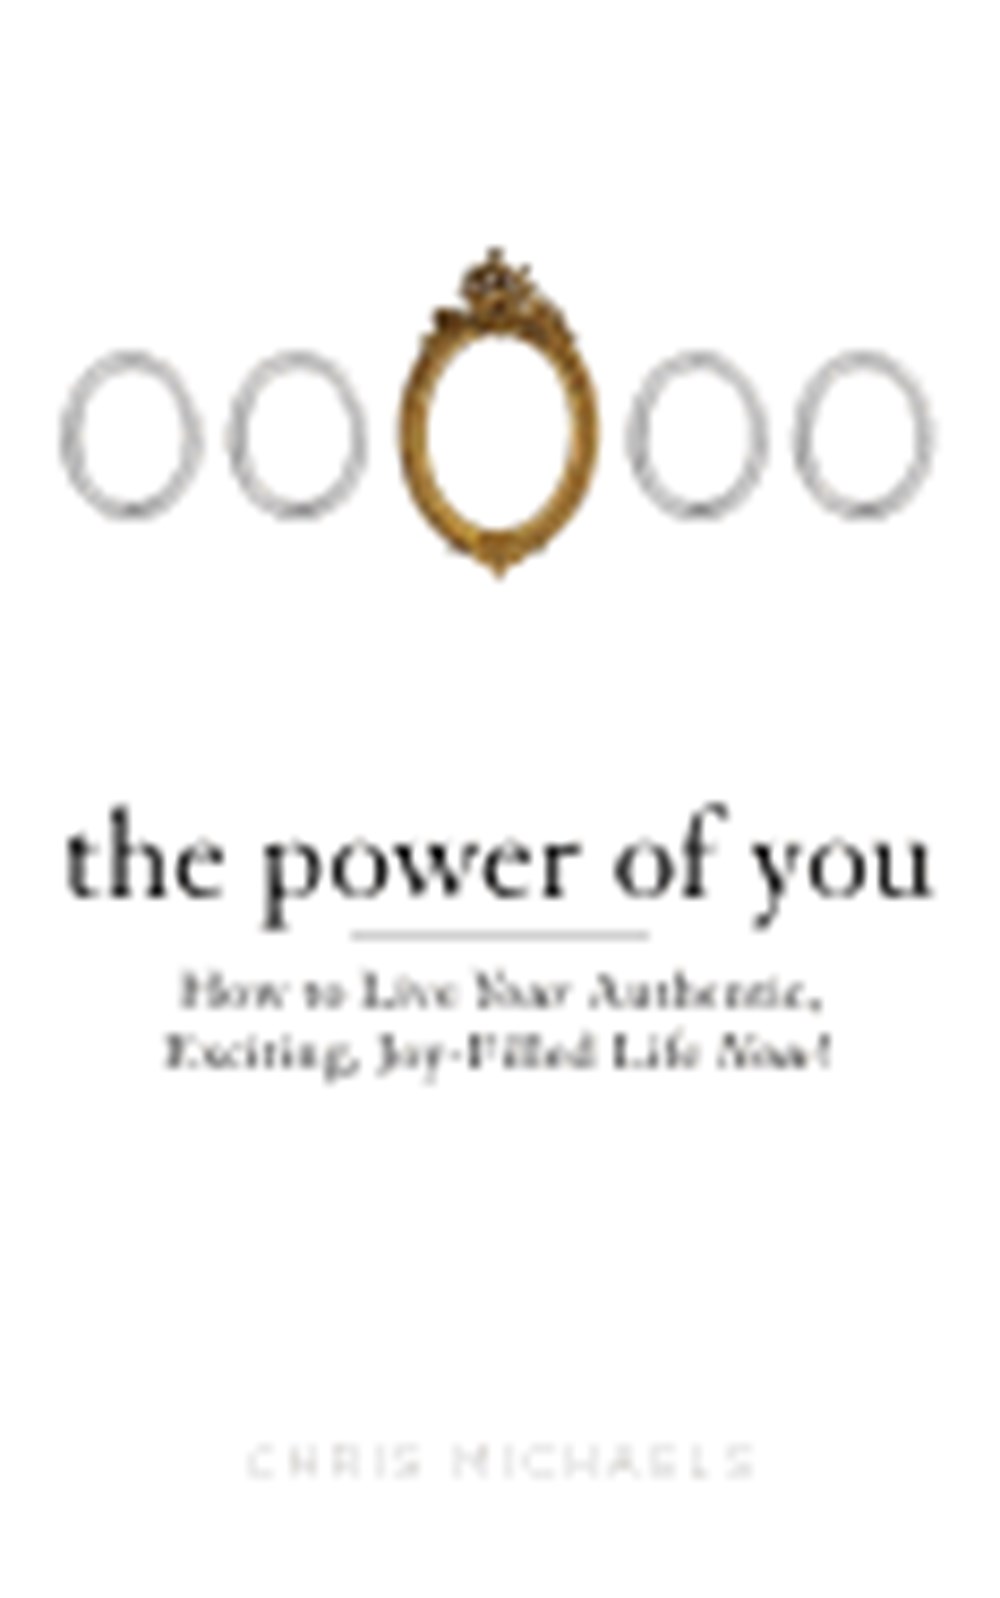 Power of You: How to Live Your Authentic, Exciting, Joy-Filled Life Now!